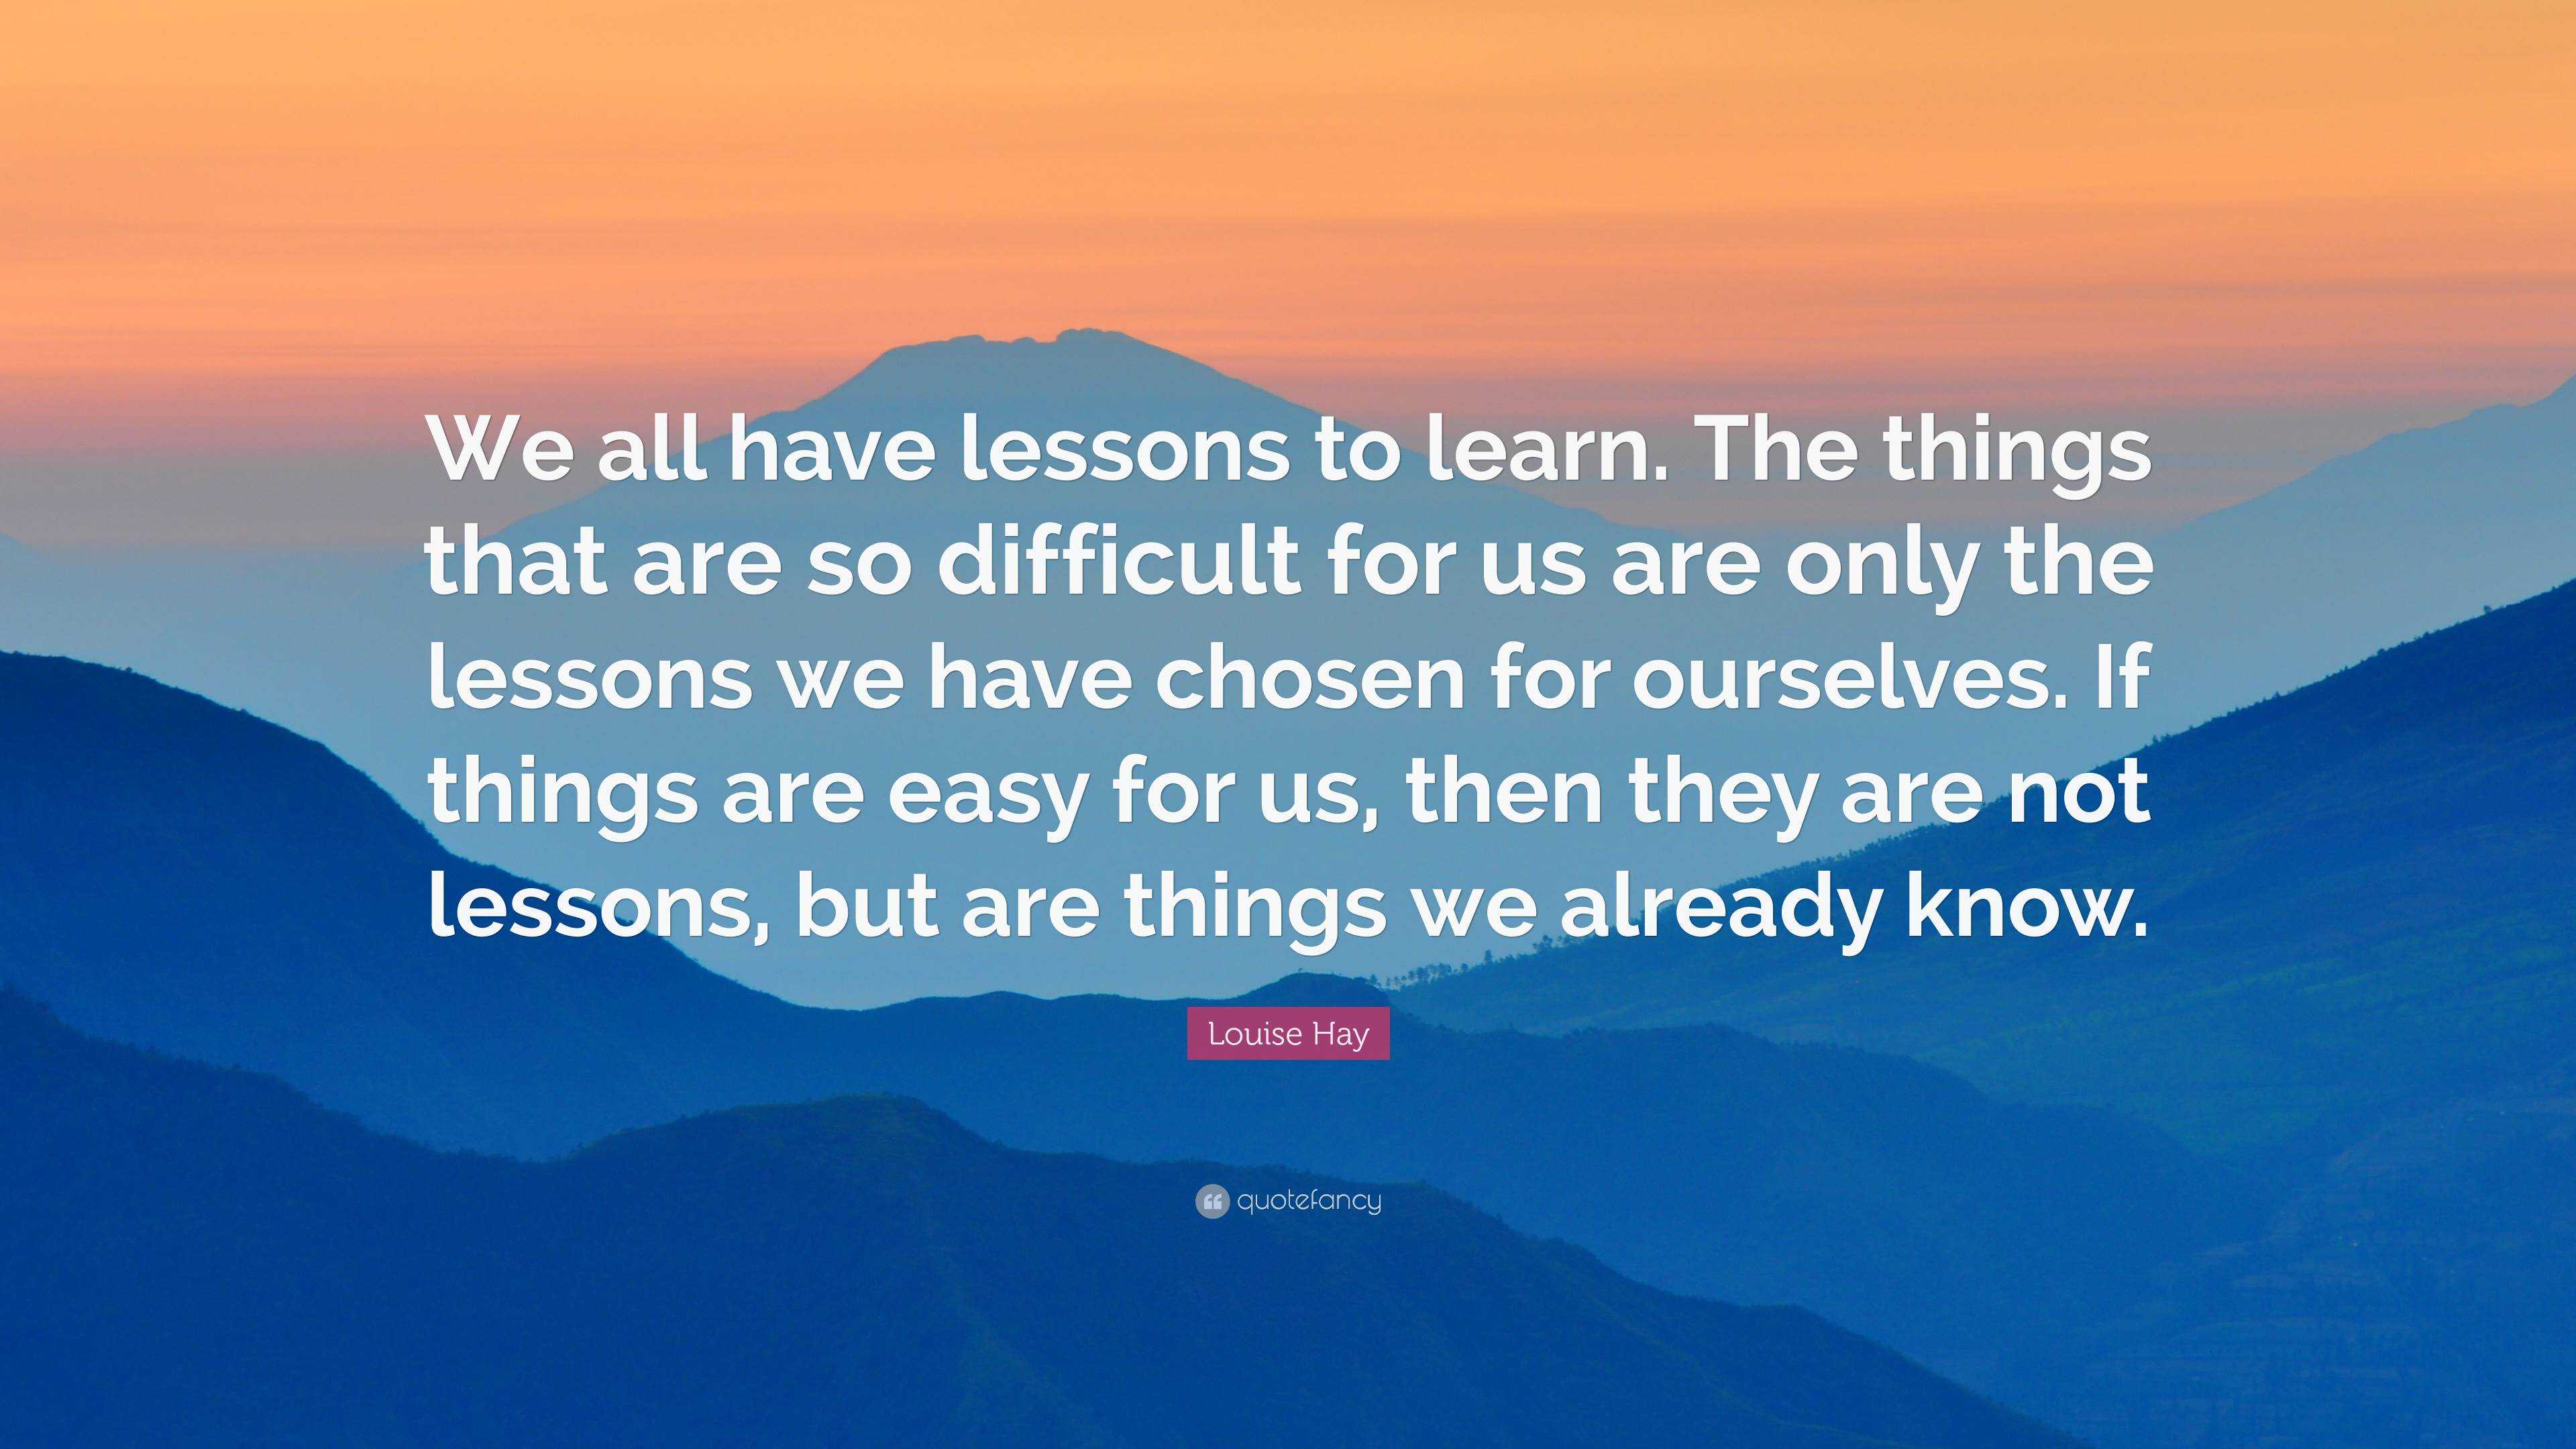 Louise Hay Quote: “We all have lessons to learn. The things that are so  difficult for us are only the lessons we have chosen for ourselves....”